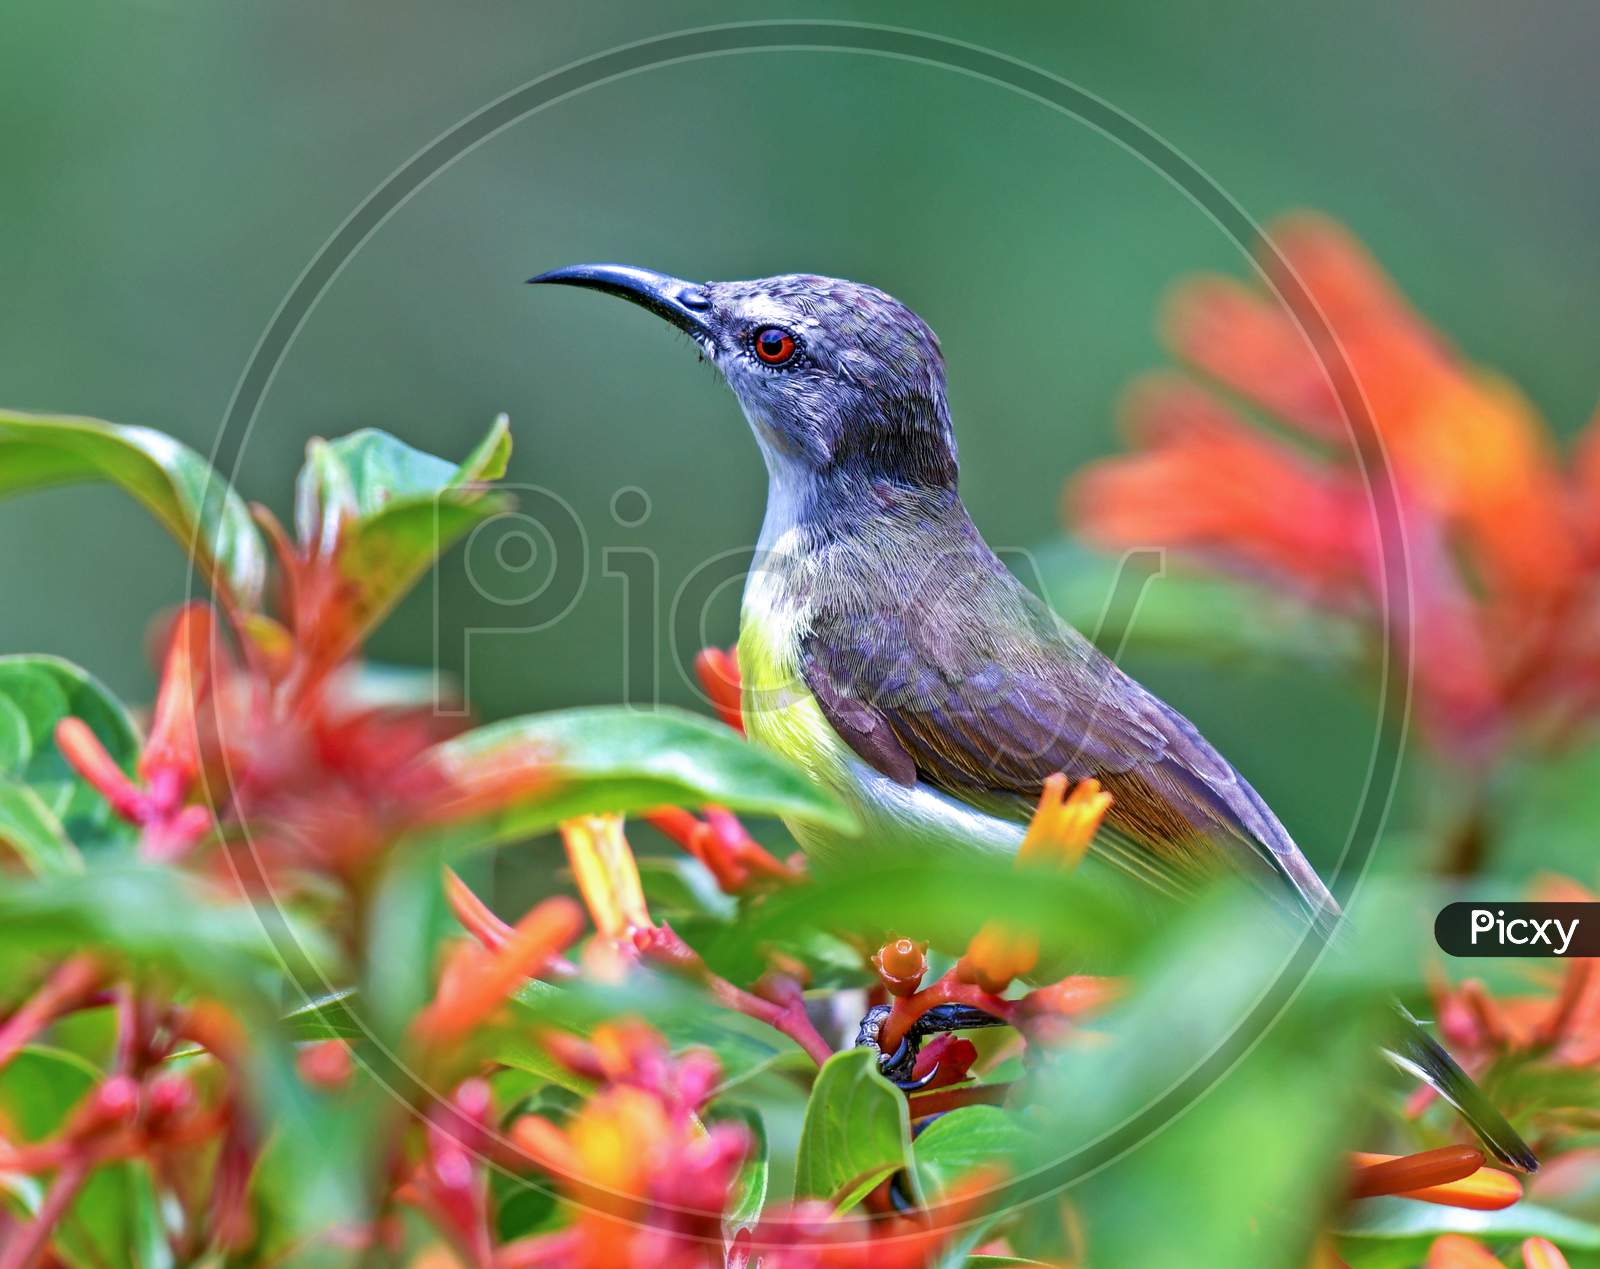 Very Colorful Shining Humming Bird Perched On A Flower Plant.